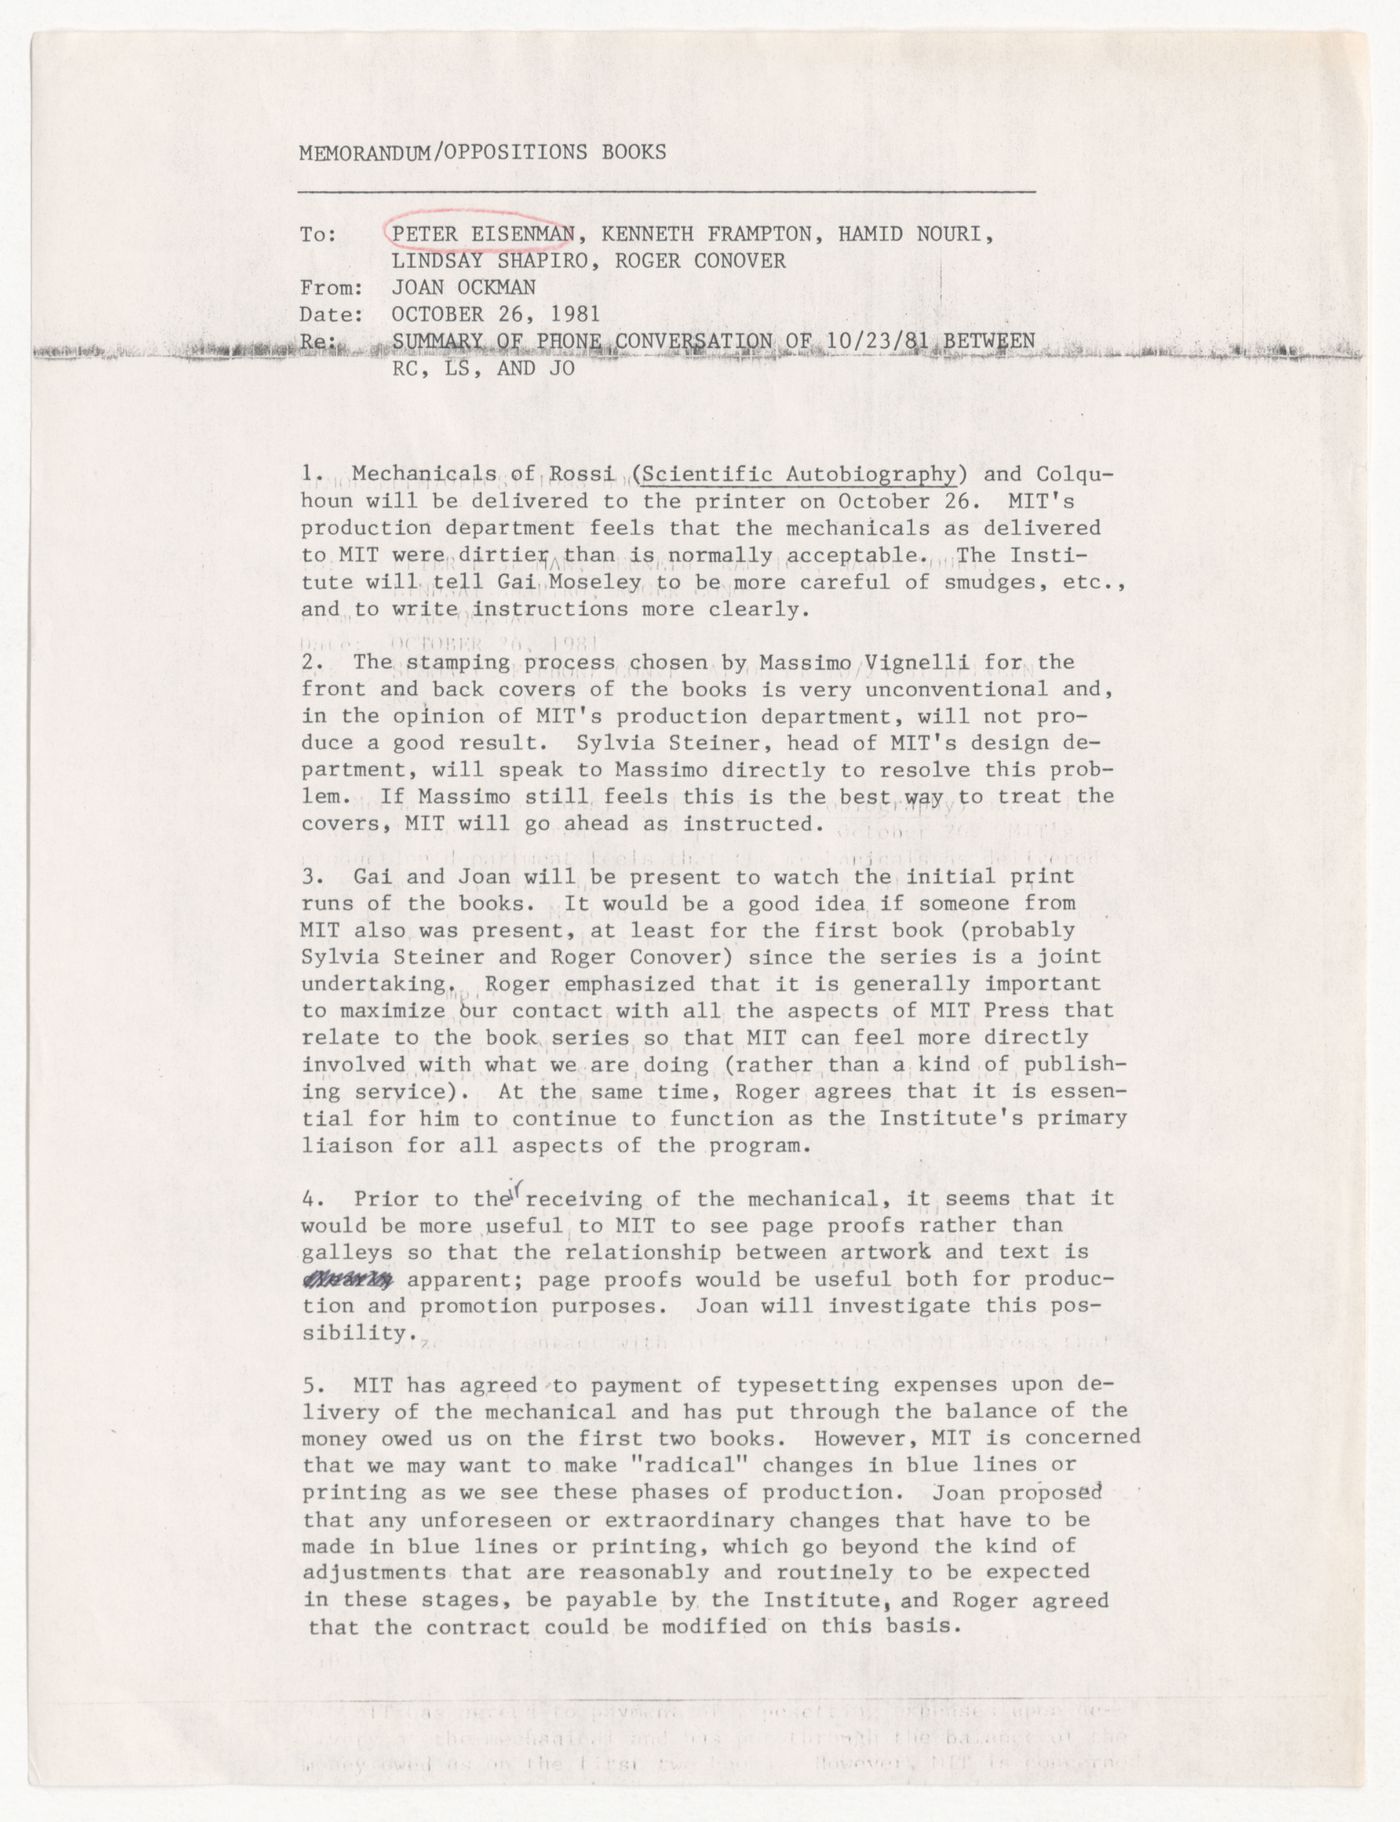 Memorandum from Joan Ockman to Peter D. Eisenman, Kenneth Frampton, Hamid R. Nouri, Lindsay Stamm Shapiro, and Roger Conover about printing of Scientific Autobiography by Aldo Rossi